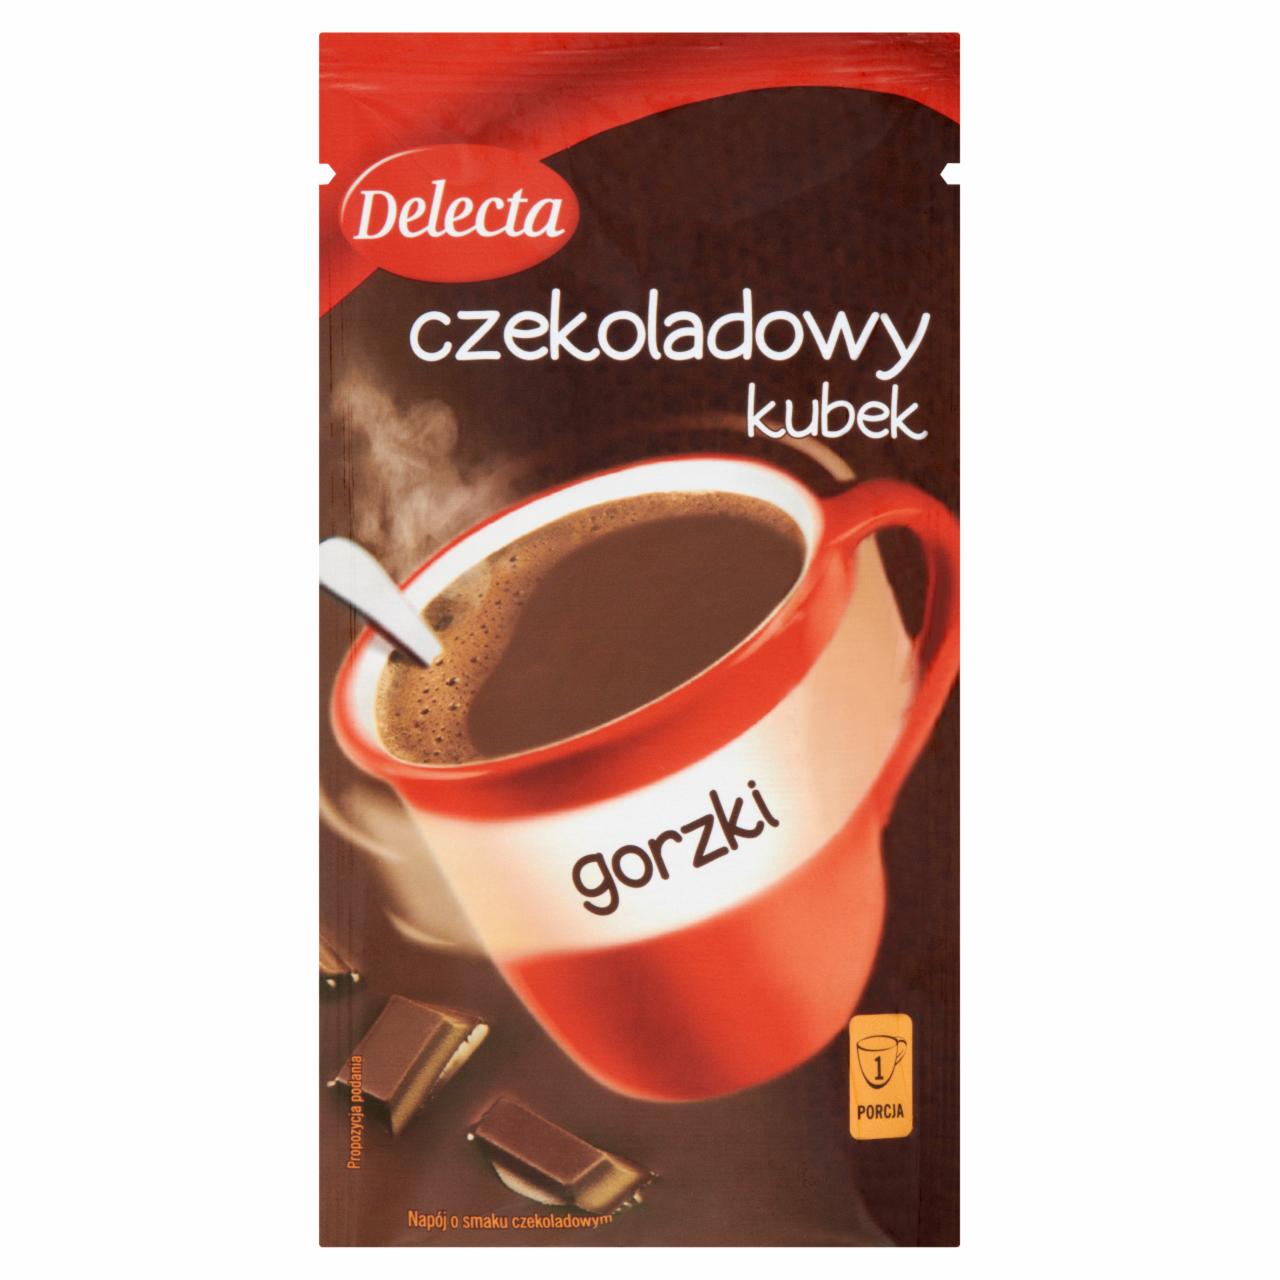 Photo - Delecta Bitter Chocolate Cup Drink 34 g